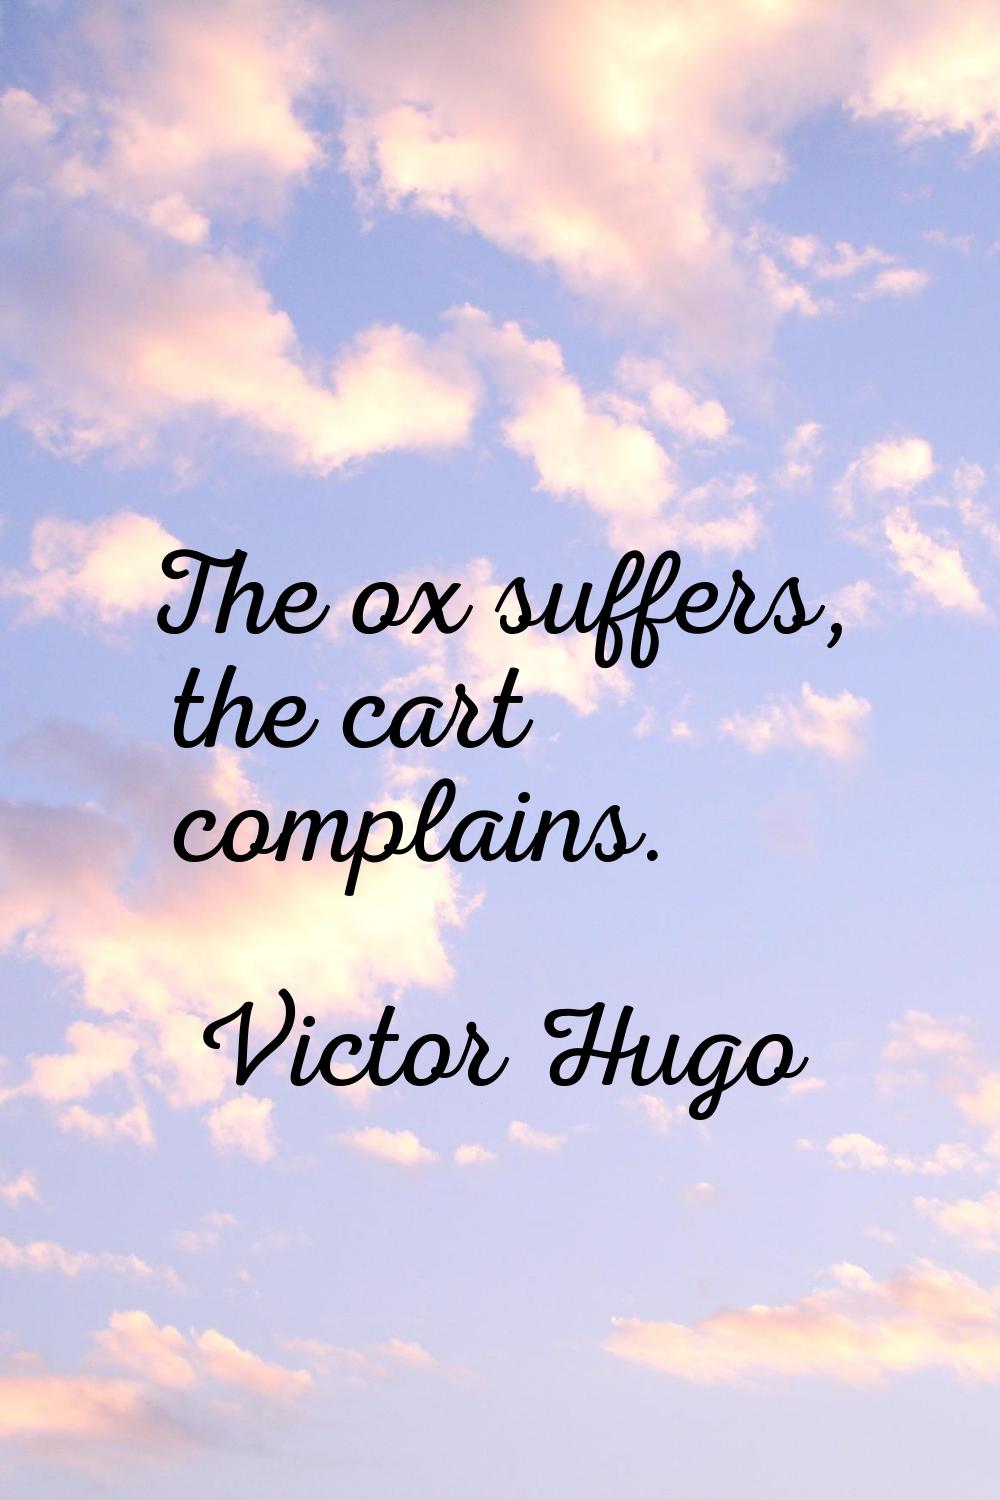 The ox suffers, the cart complains.